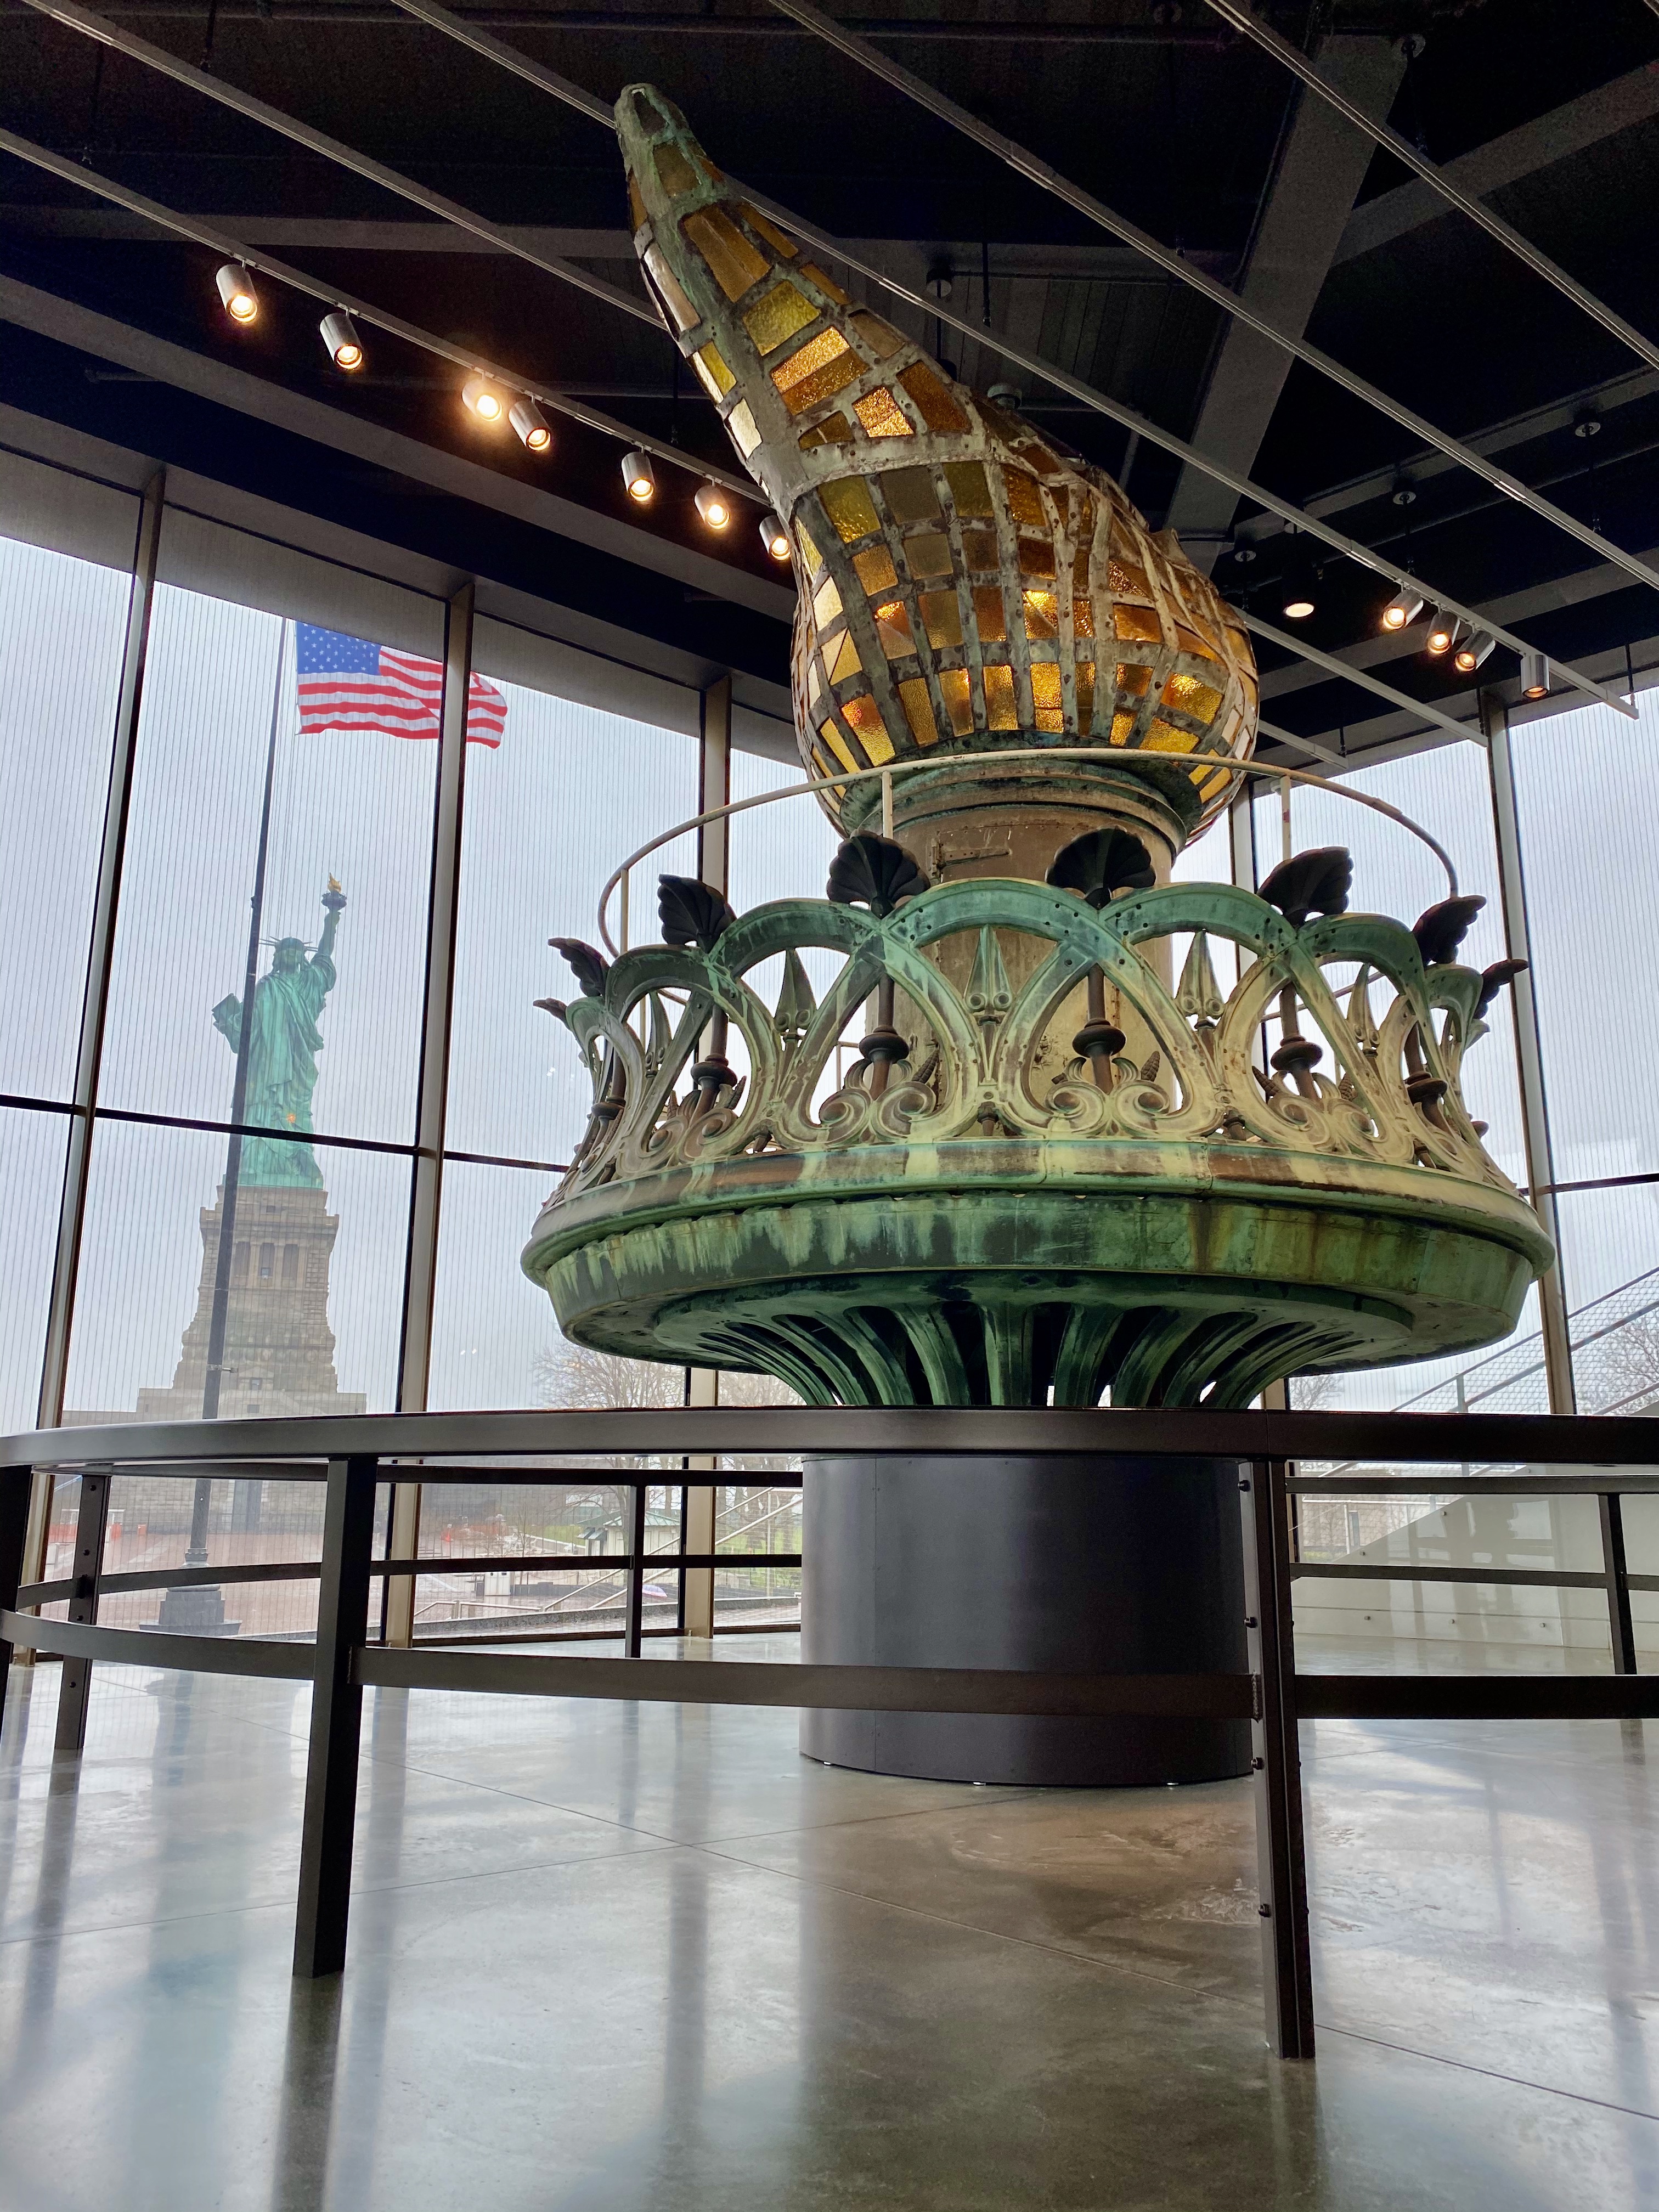 The Statue of Liberty Museum